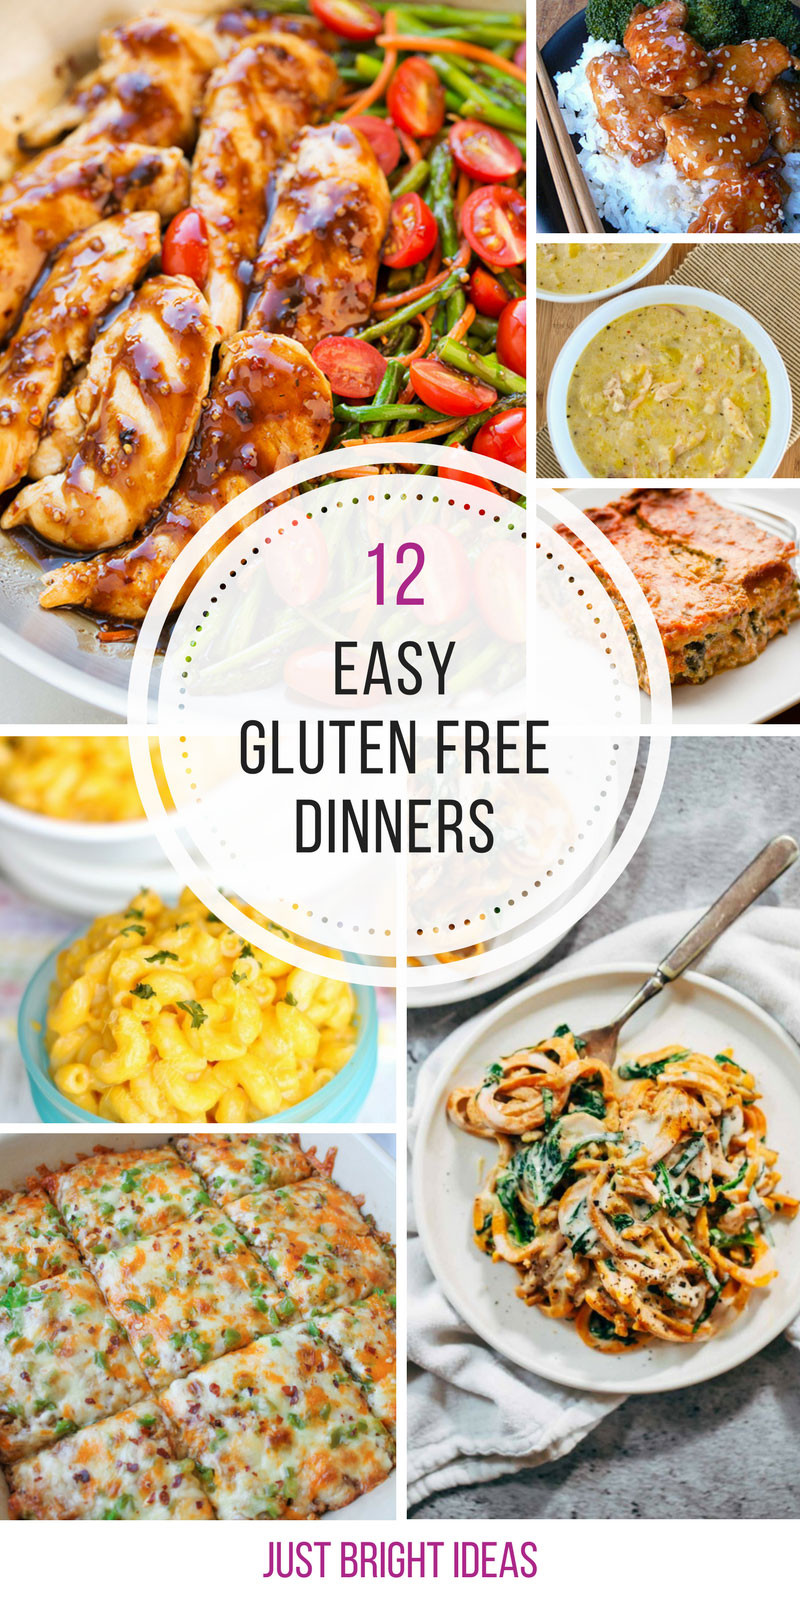 Easy Dairy Free Dinners
 12 Easy Gluten Free Dinner Recipes Your Family Will Love